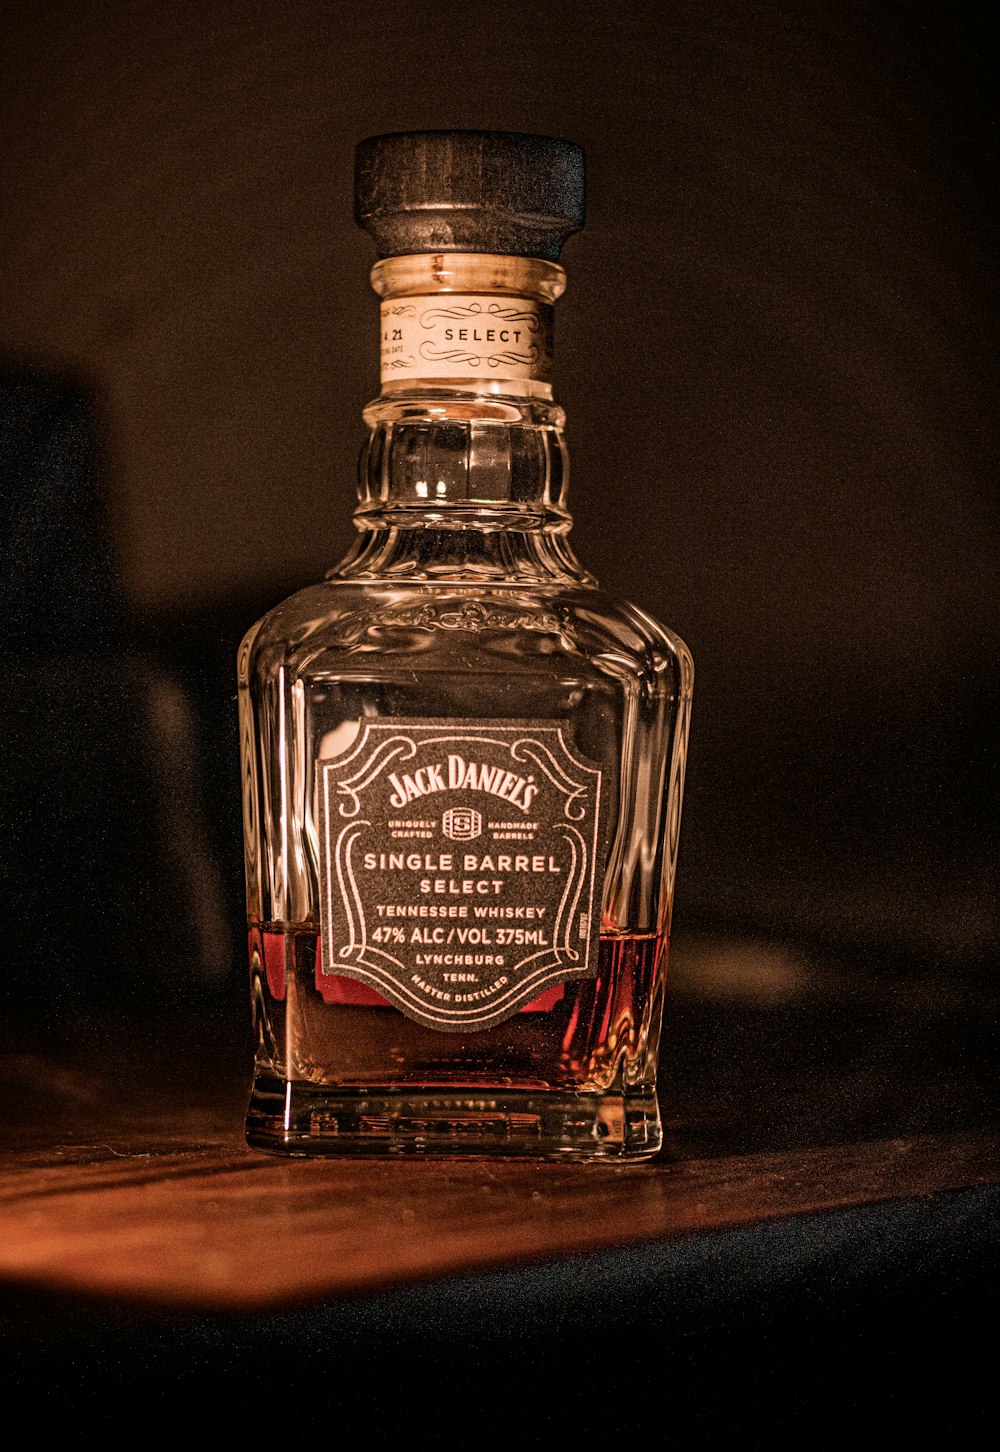 a bottle of alcohol with Jack Daniel's in the background